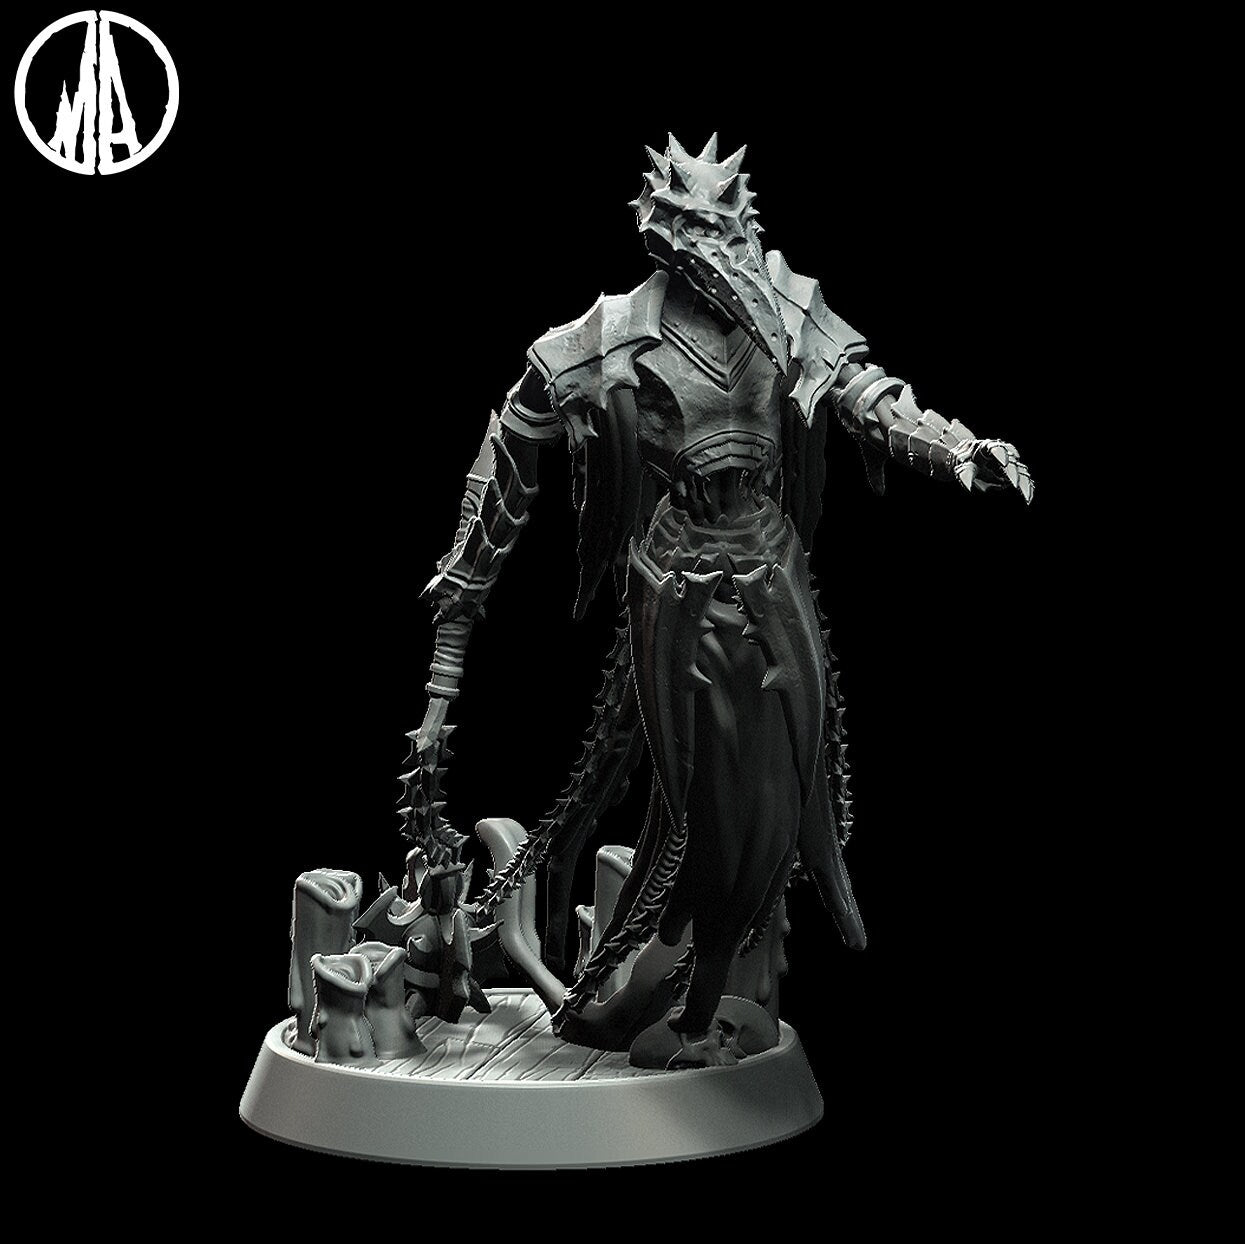 Plagued Wraith | Monolith Arts | 3D Printed Resin Model | Ideal for - RPG, DnD, Table top gaming, Fantasy